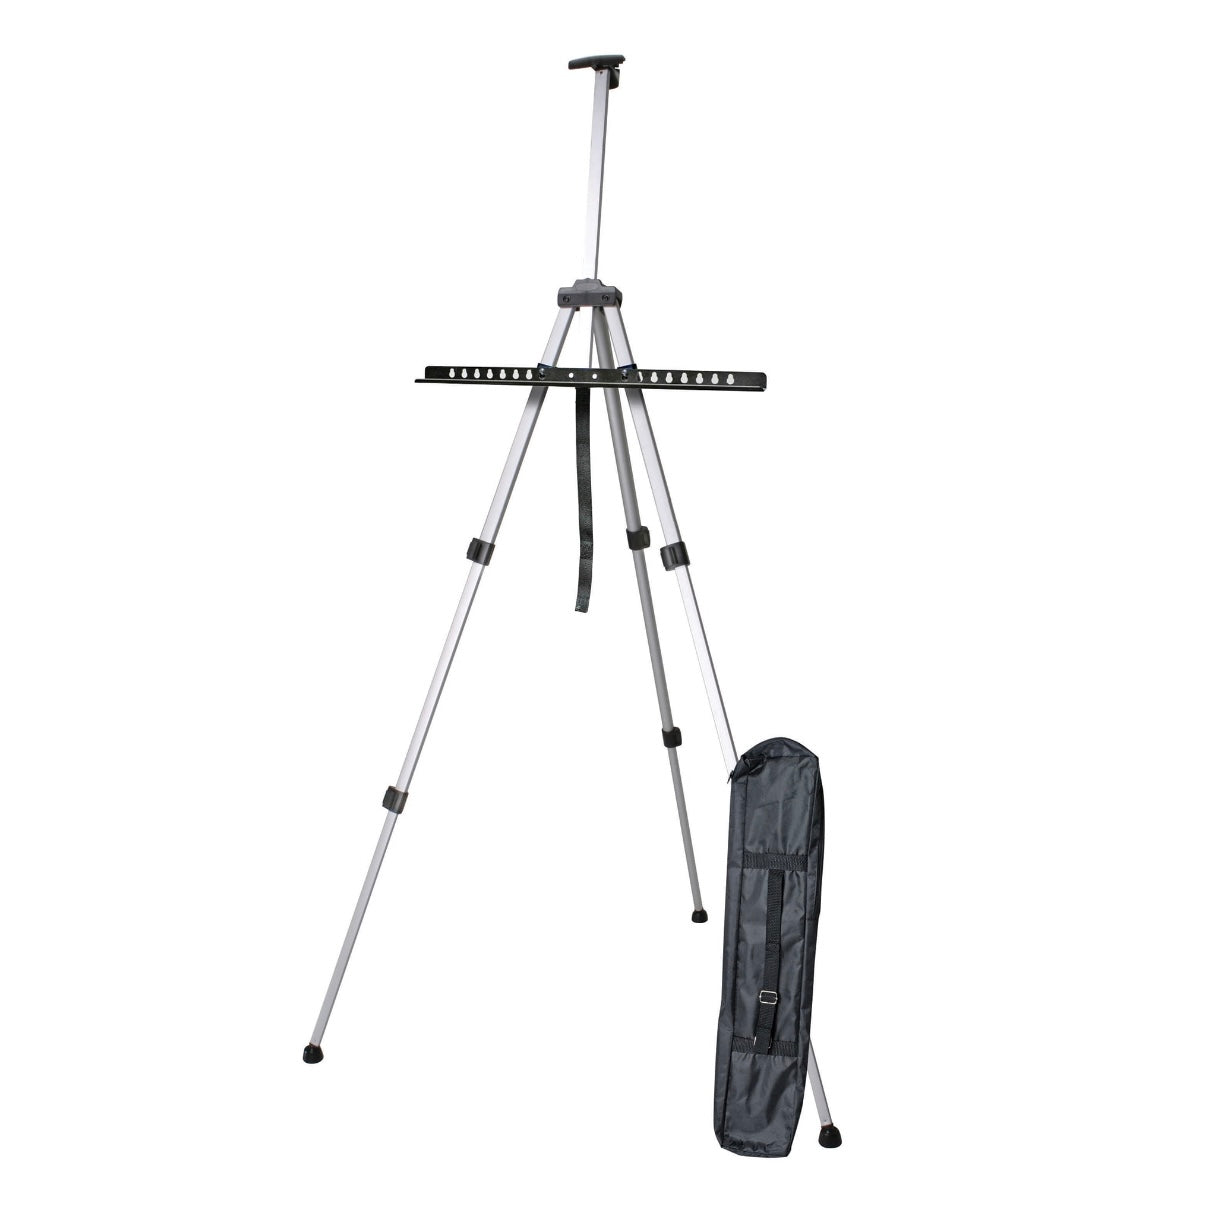 OverPatio Art Easel Wood Tripod A-Frame Easel Stand Floor Display